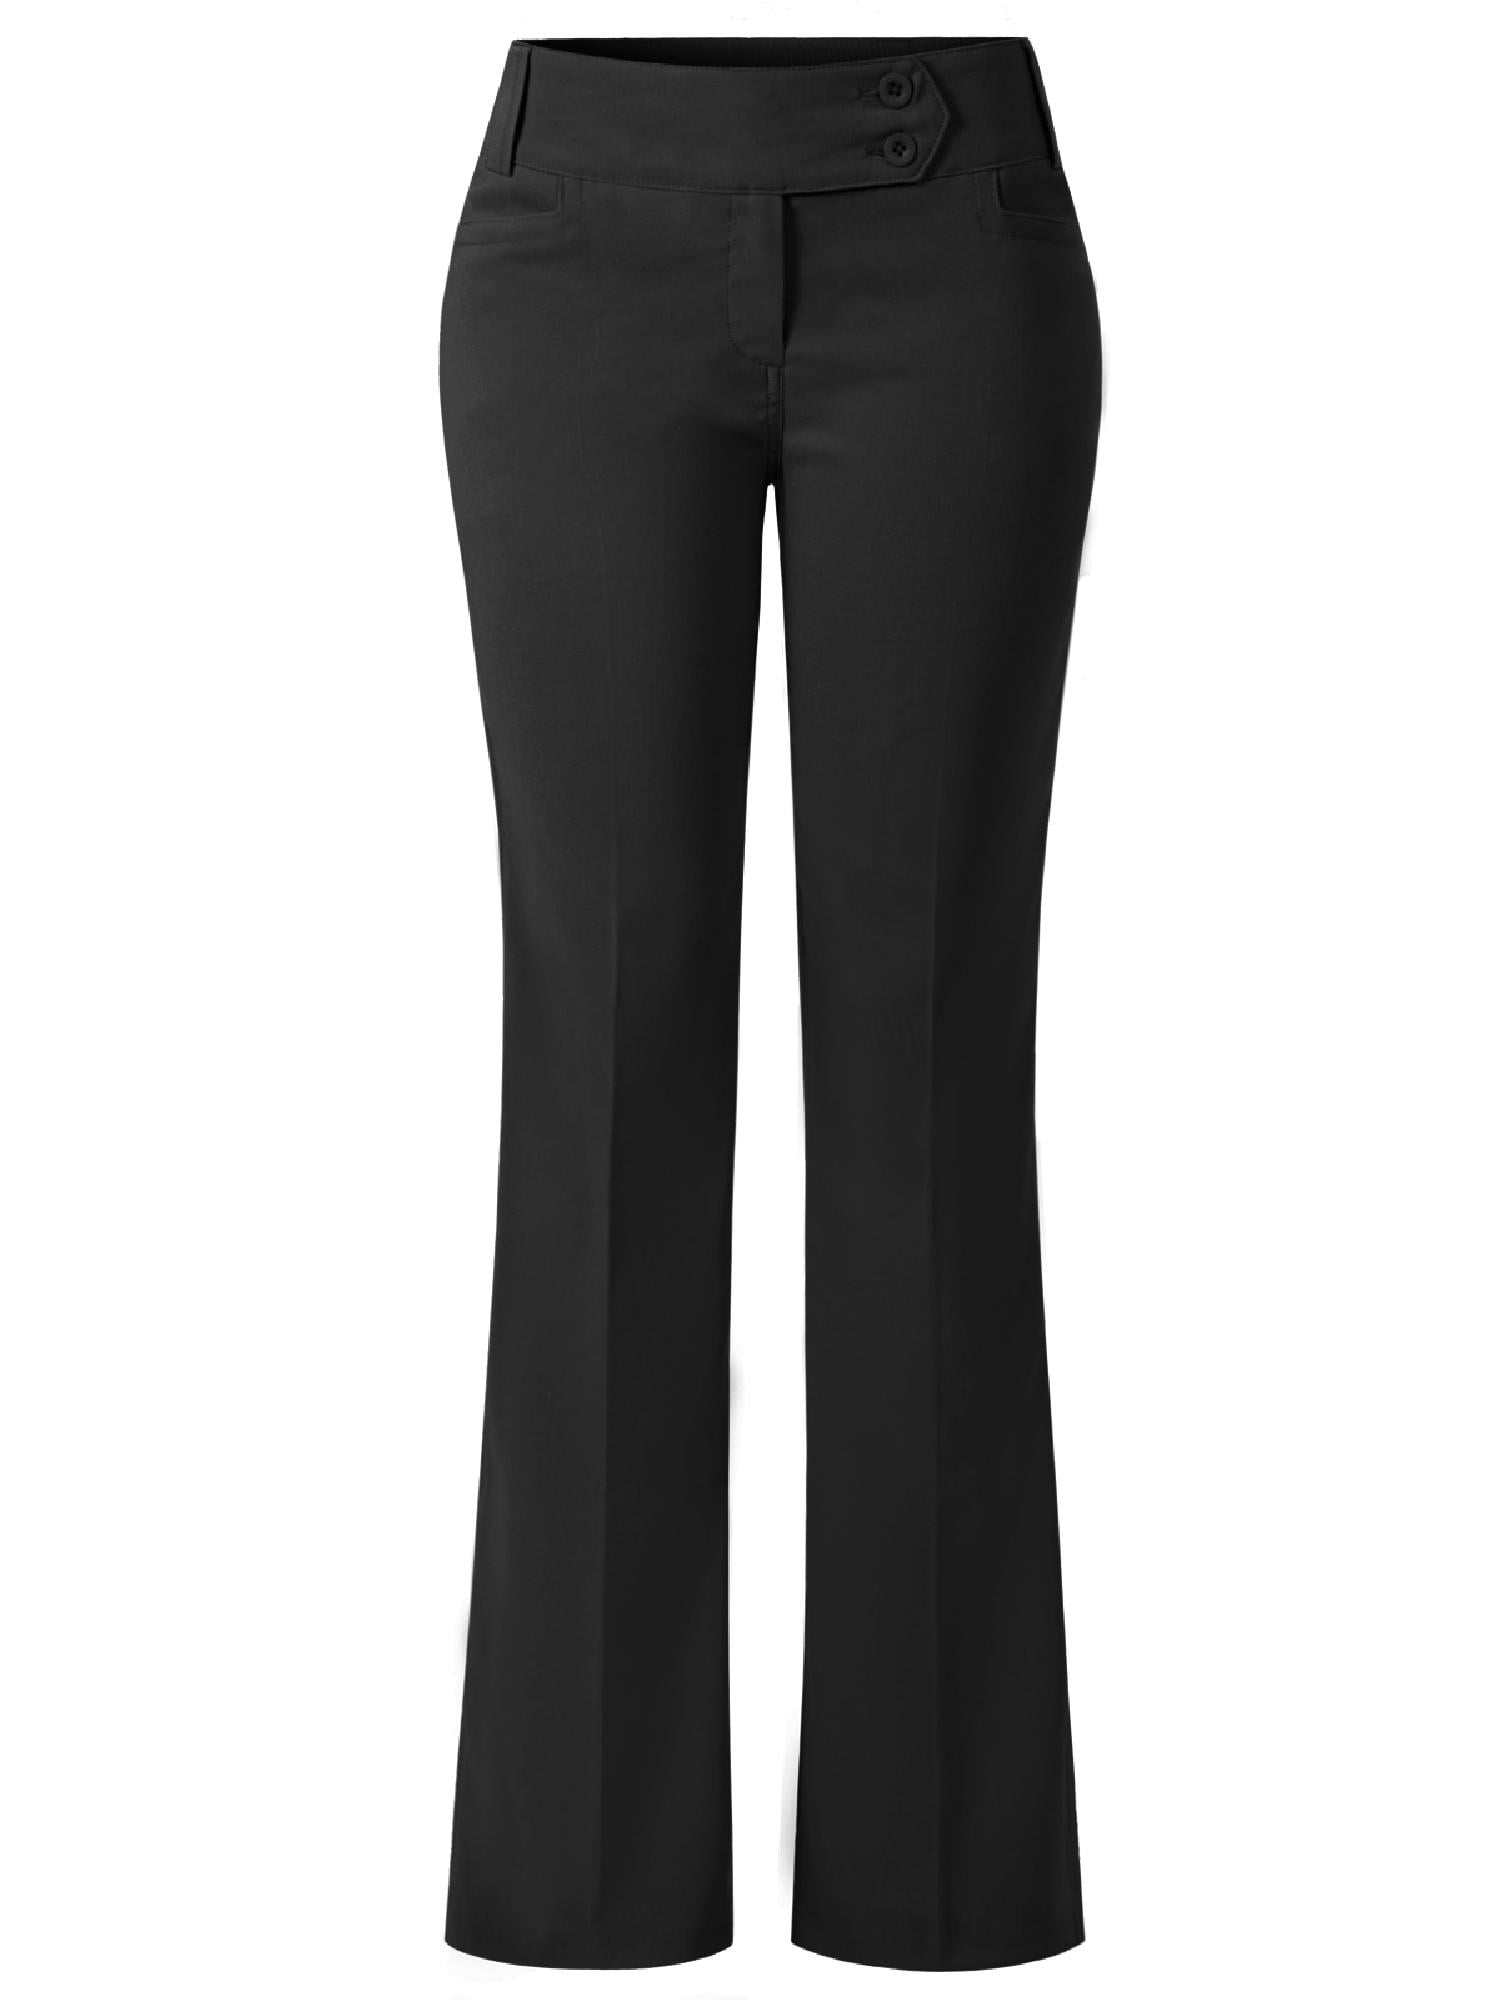 Buy Women Formal Pants, Black Tailored Pants, Business Pants Women, Black  Trousers, Office Clothing Women, Black Suit Women, Formal Pants Suit Online  in India - Etsy